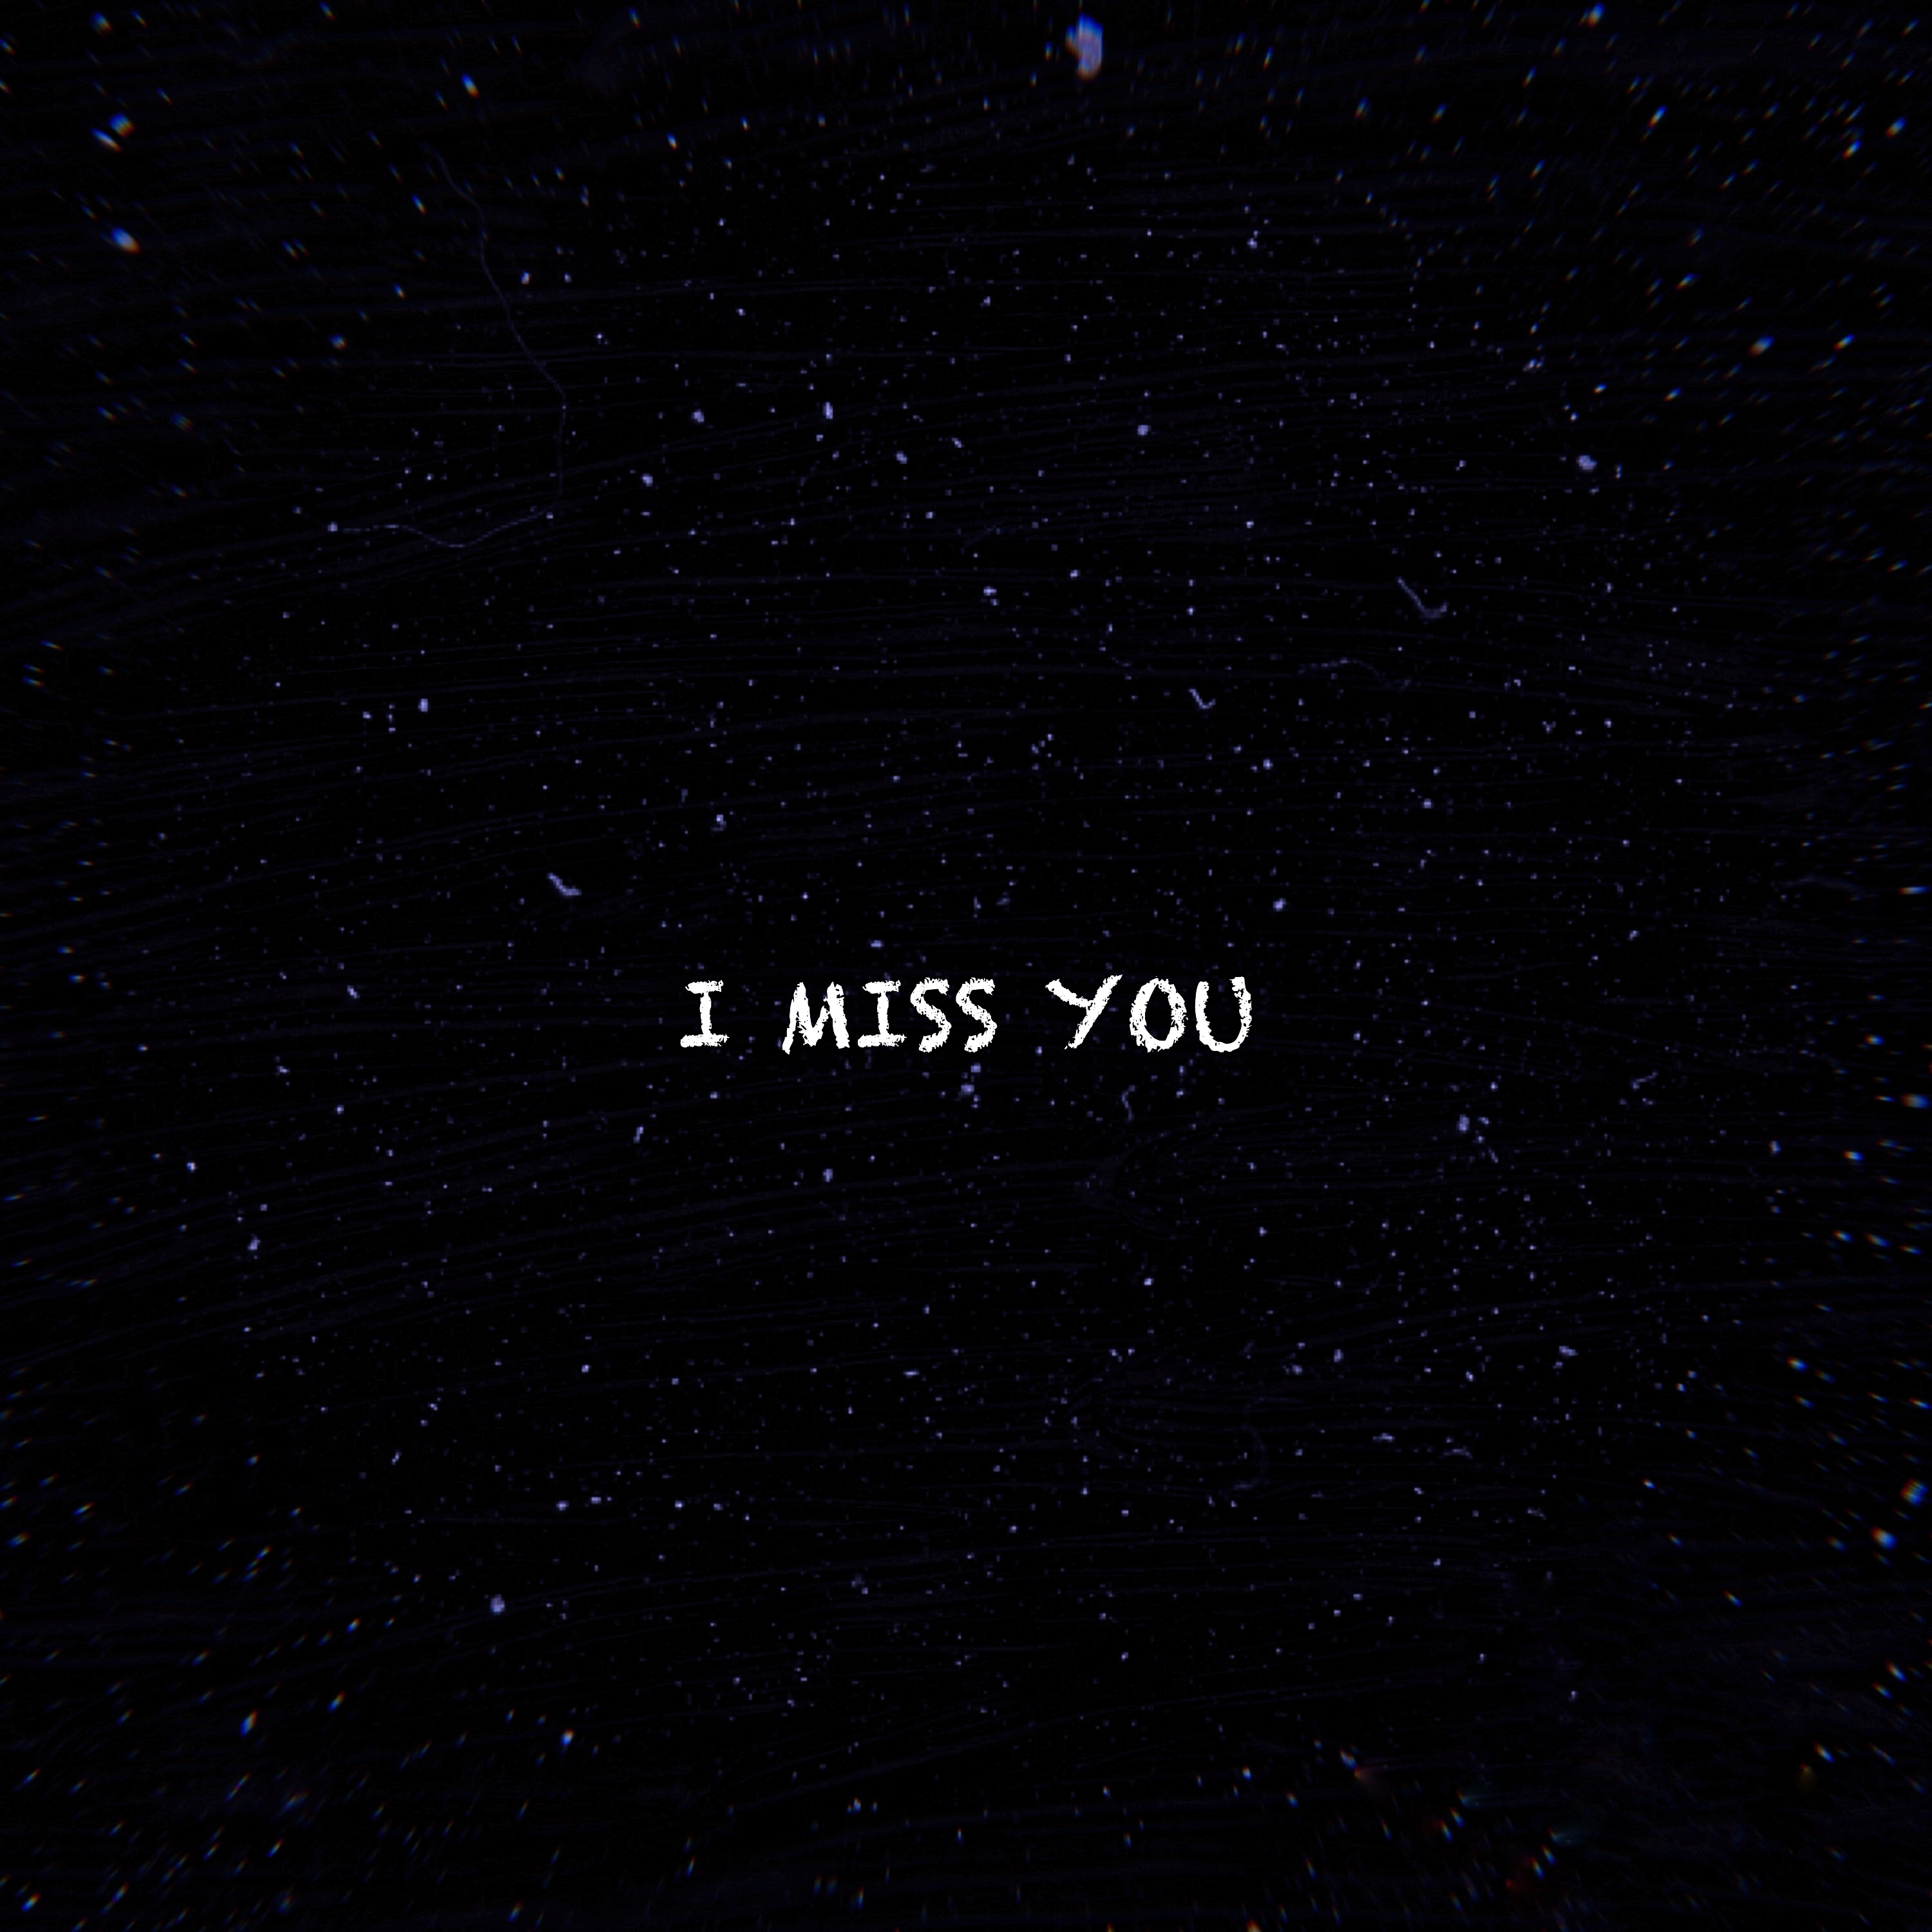 Best Miss You wallpapers for phone screen